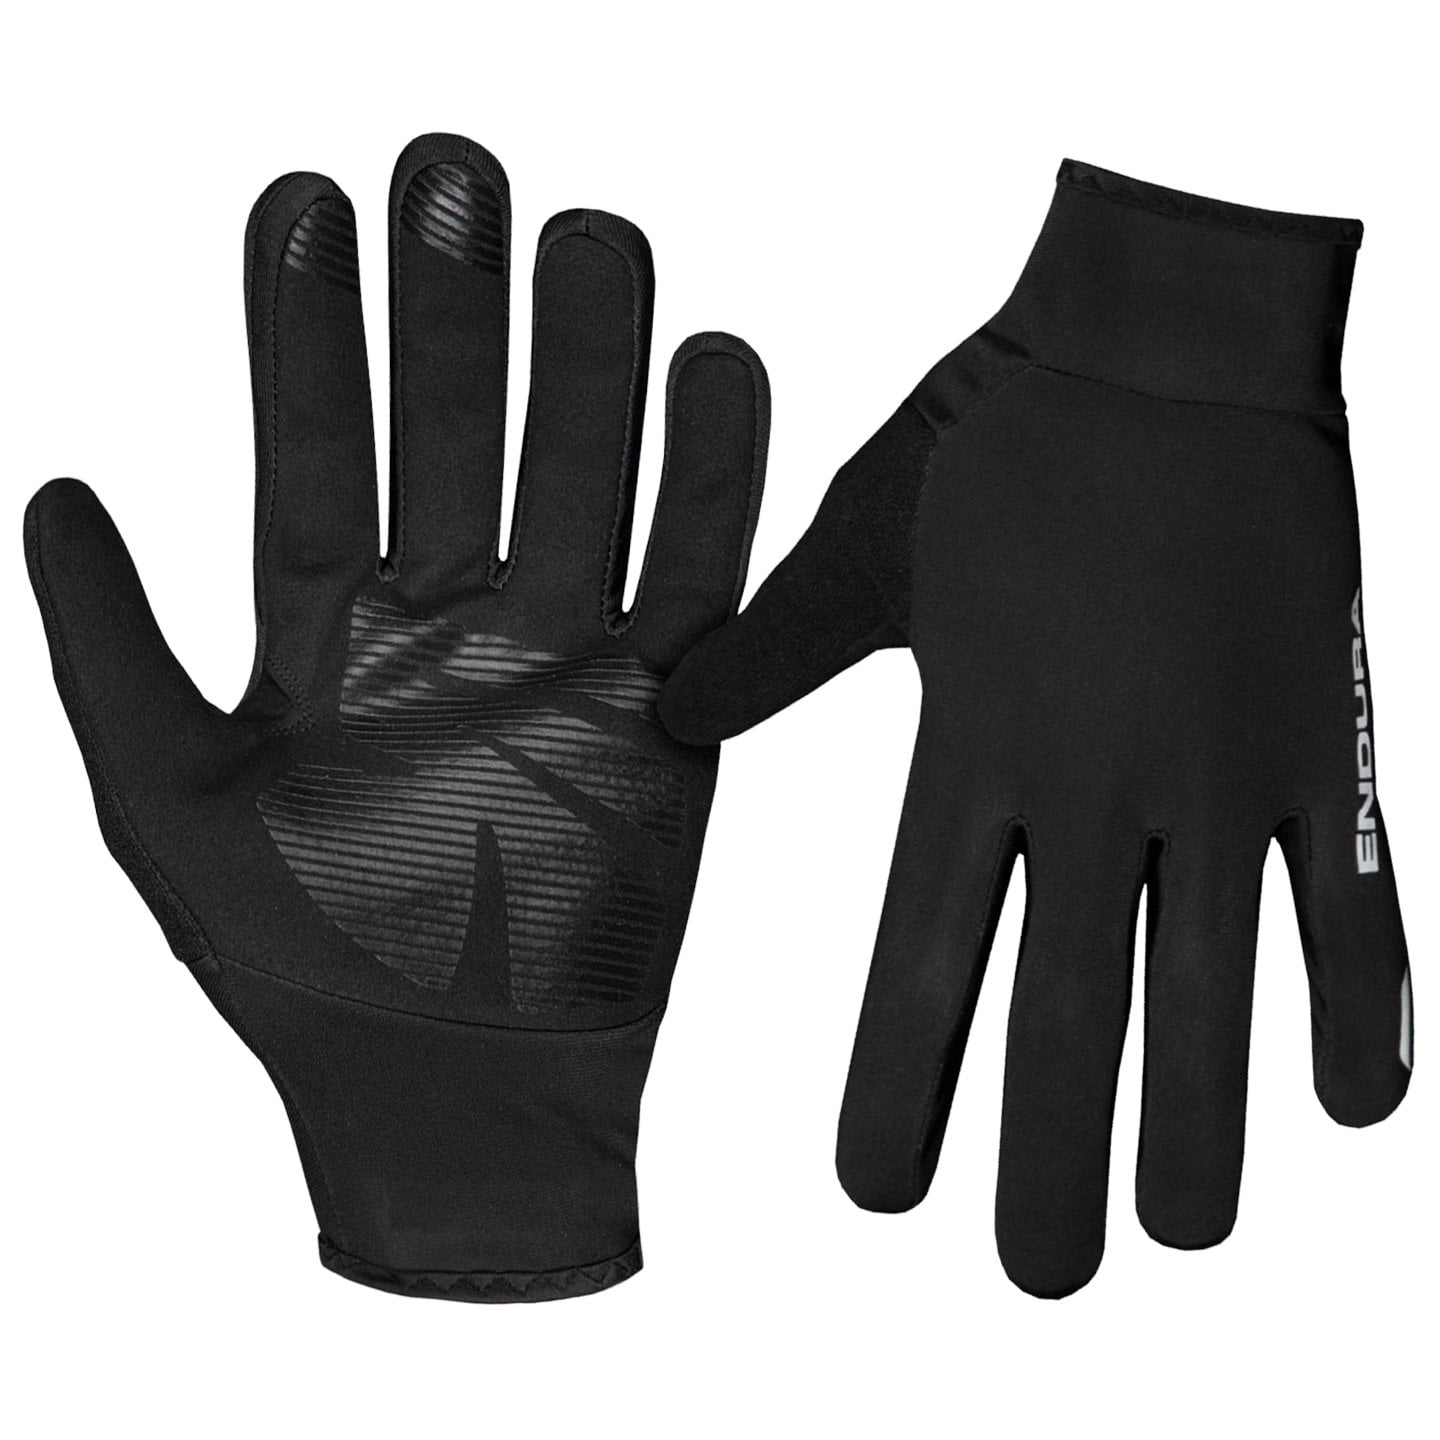 ENDURA FS260-Pro Thermo Winter Cycling Gloves Winter Cycling Gloves, for men, size 2XL, Cycling gloves, Cycle clothing